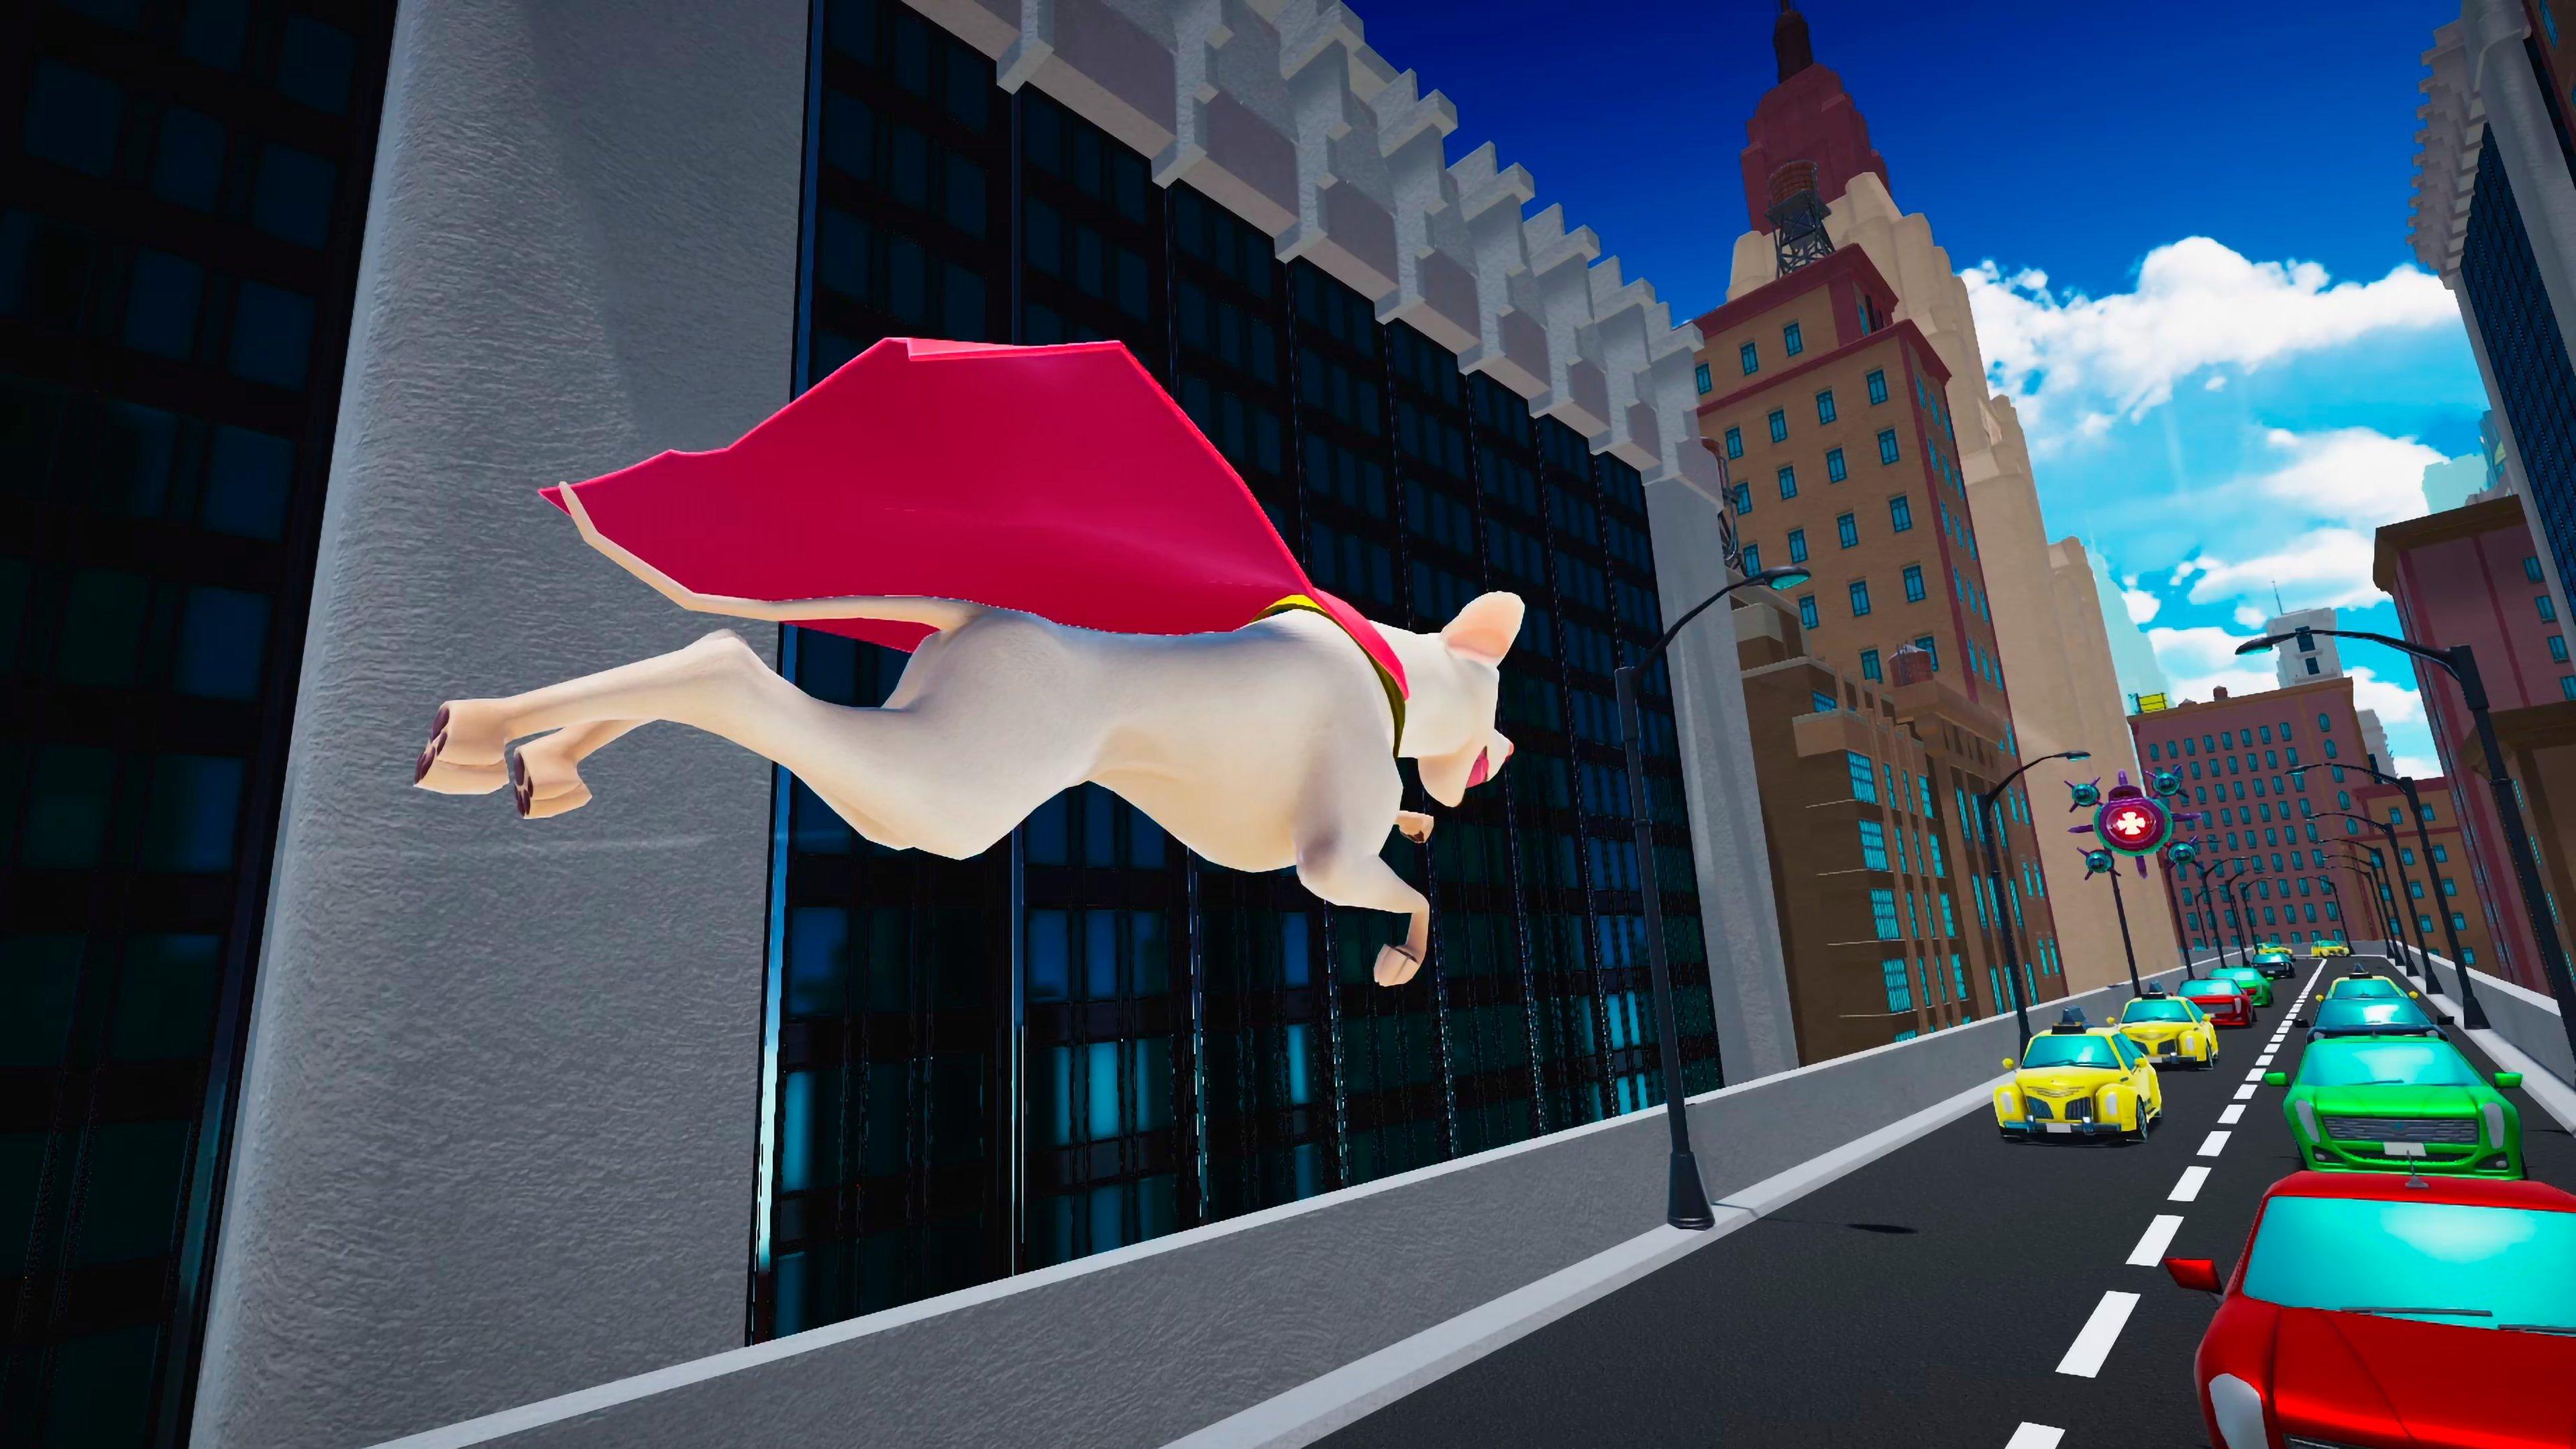 DC League of Super-Pets: The Adventures of Krypto and Ace (Video